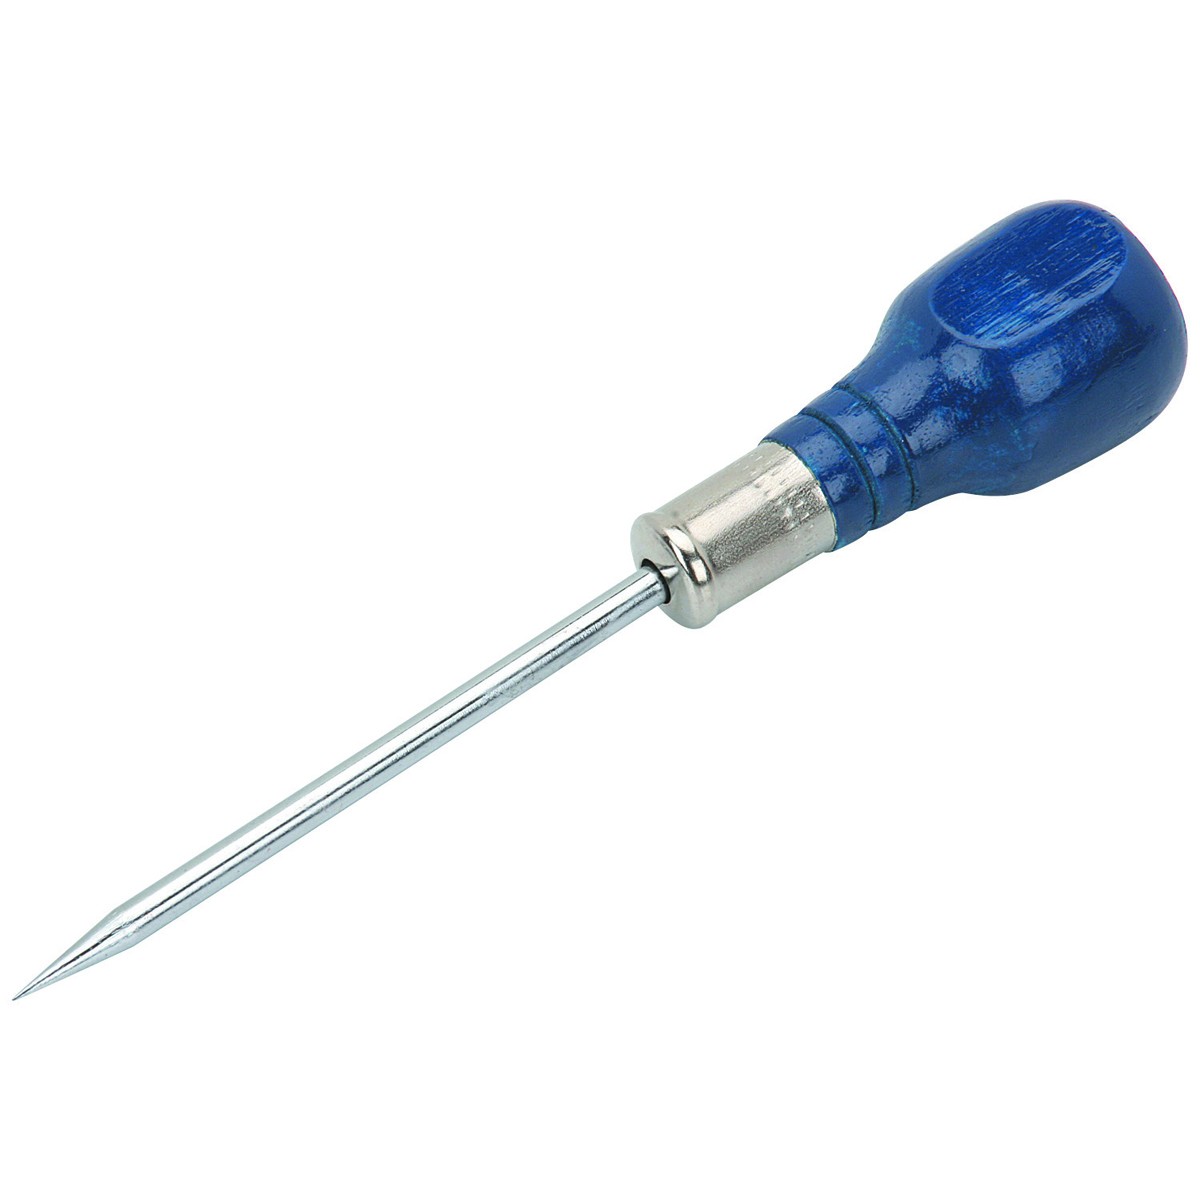 New   Central Forge  4 In. Scratch Awl